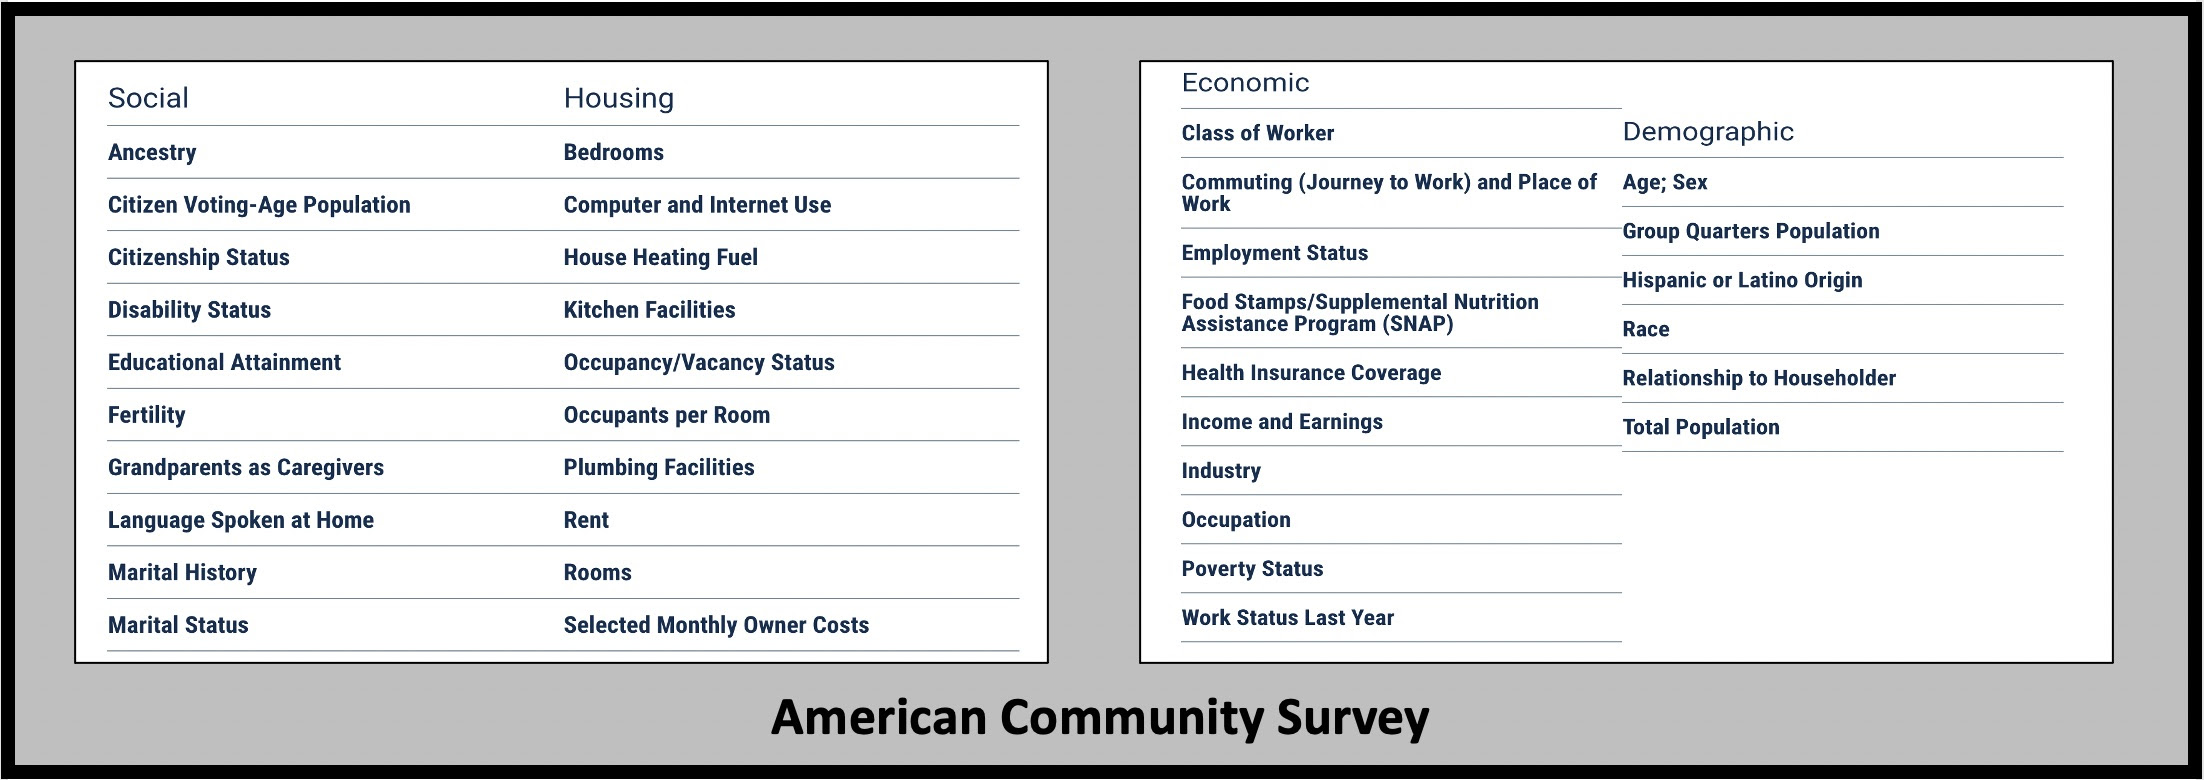 "The American Community Survey (ACS) is an ongoing survey that provides vital information on a yearly basis about our nation and its people. Information from the survey generates data that help determine how more than $675 billion in federal and state funds are distributed each year." It shares data collected by the Census.